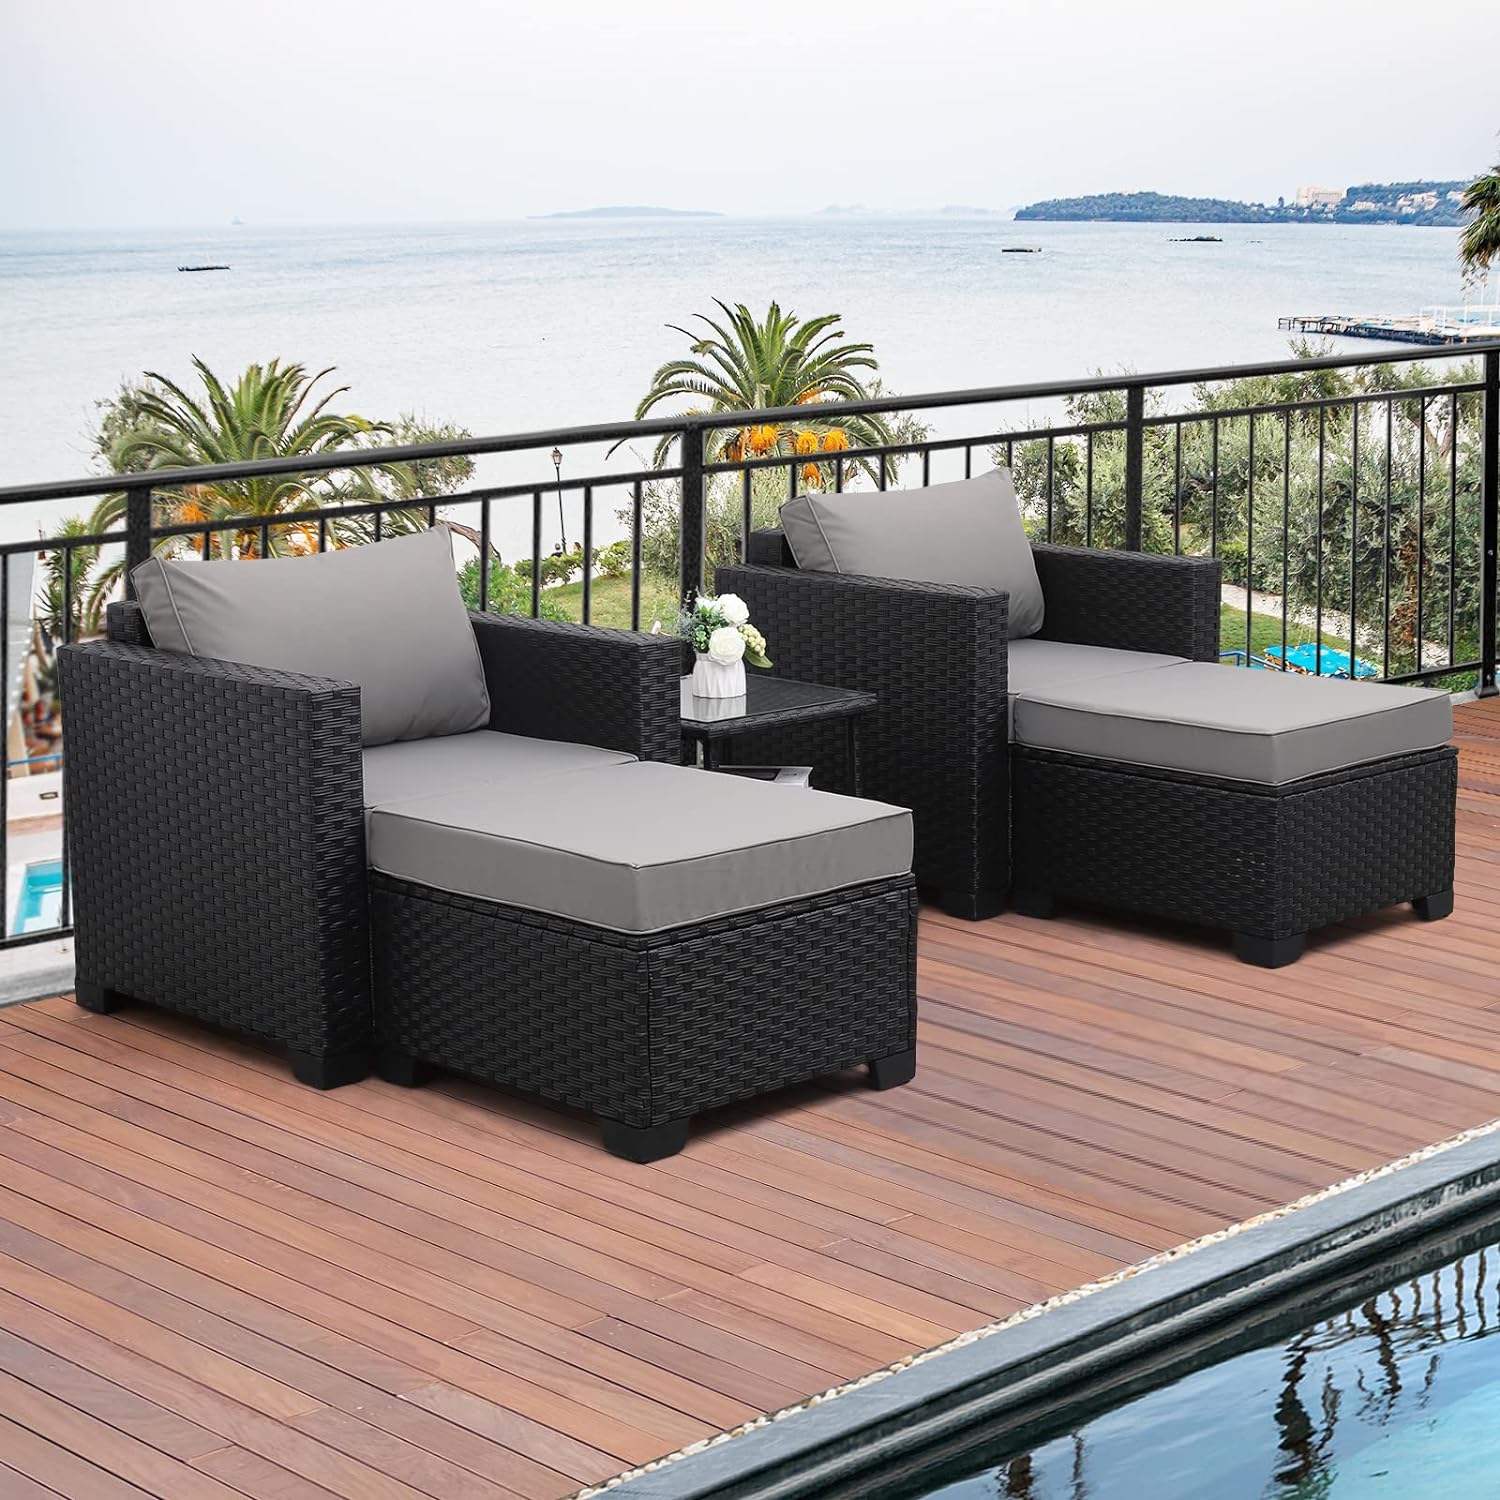 Valita 5-Piece Outdoor PE Wicker Furniture Set, Patio Sectional Chaise Lounge Black Rattan Chairs and Ottomans,Conversation Sofa with Non-Slip Gray Washable Cushions